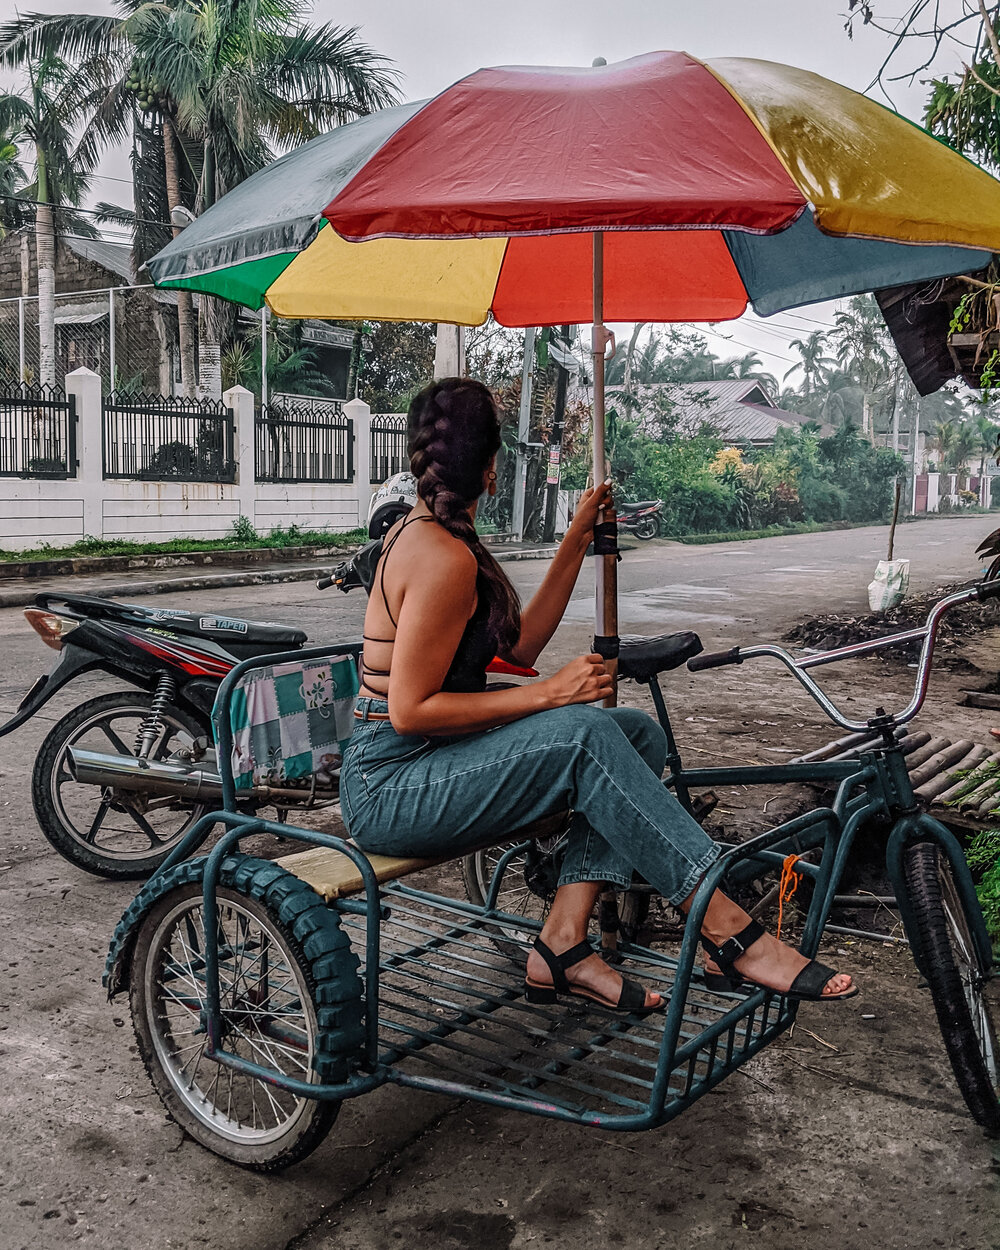 Rachel Off duty: Tricycle Rides in the Philippines